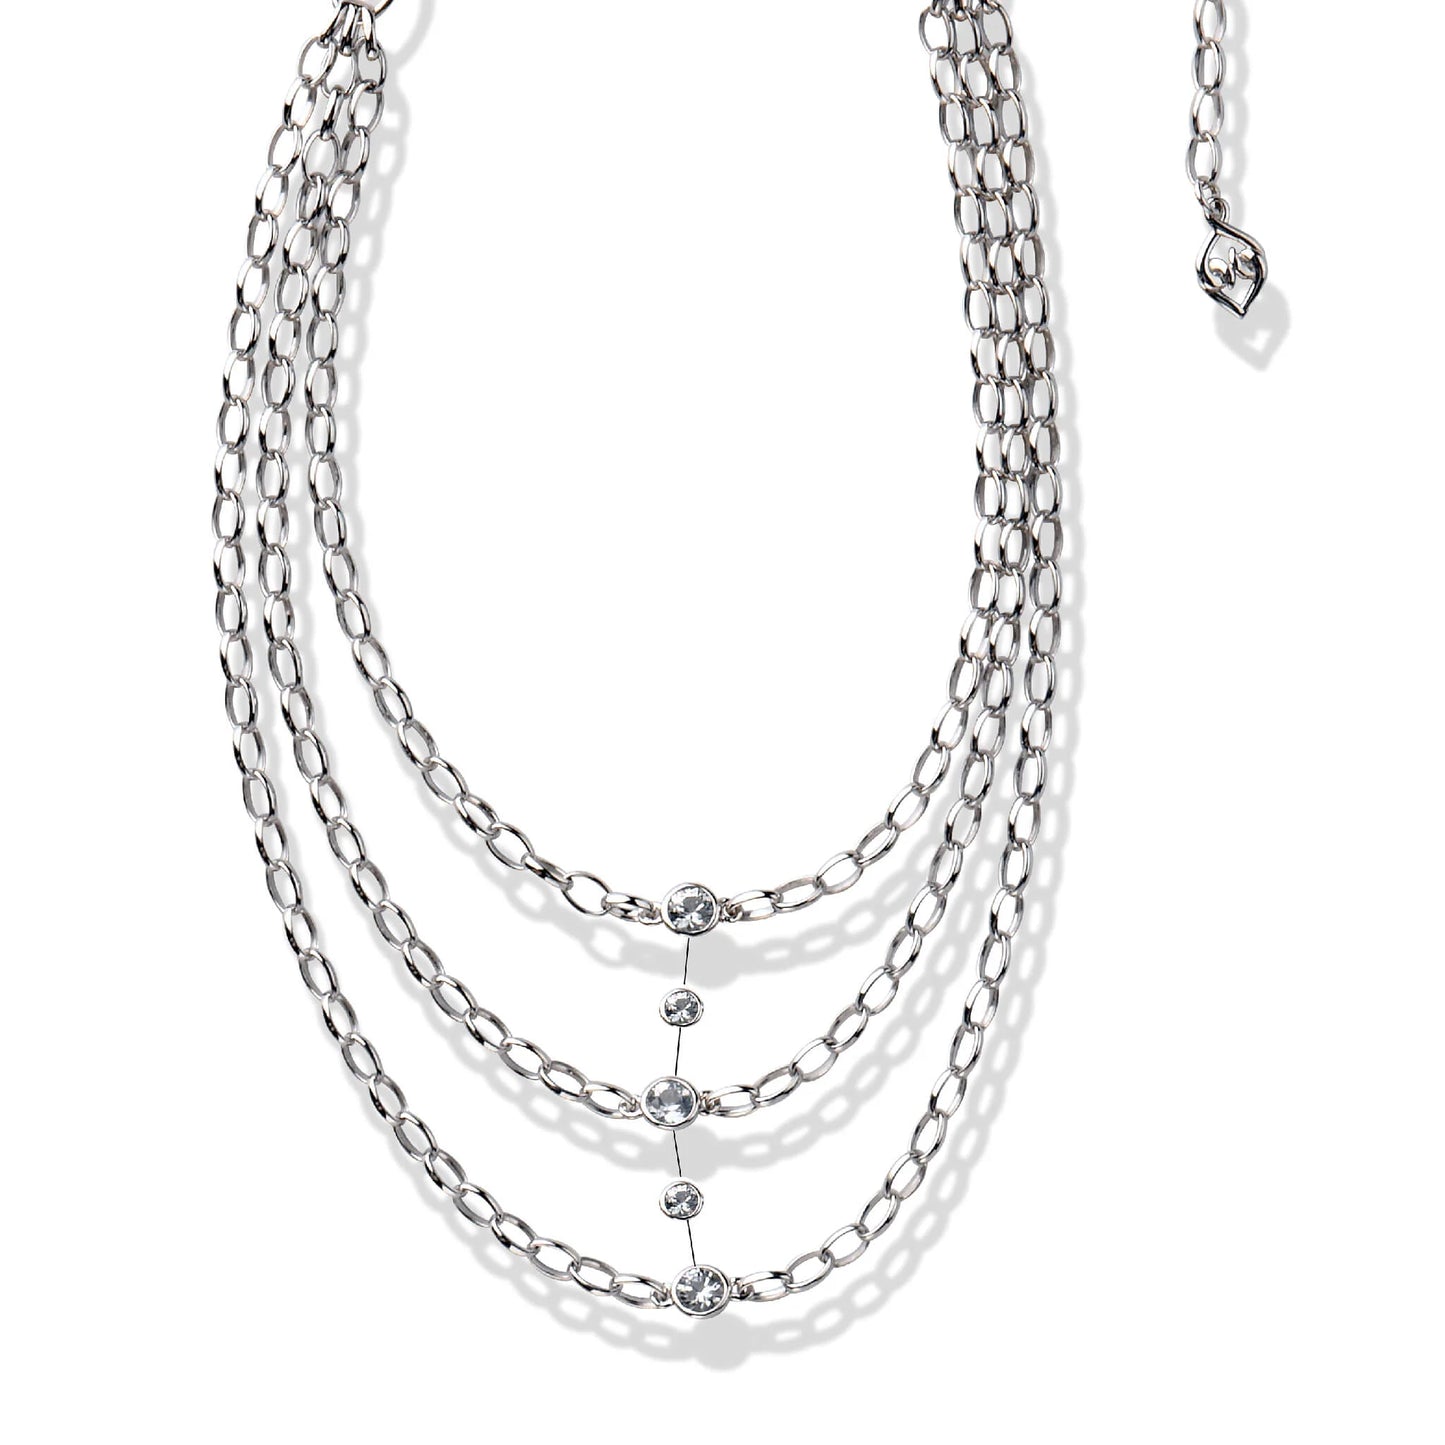 Sterling Silver White Sapphire Layered Bib Necklace